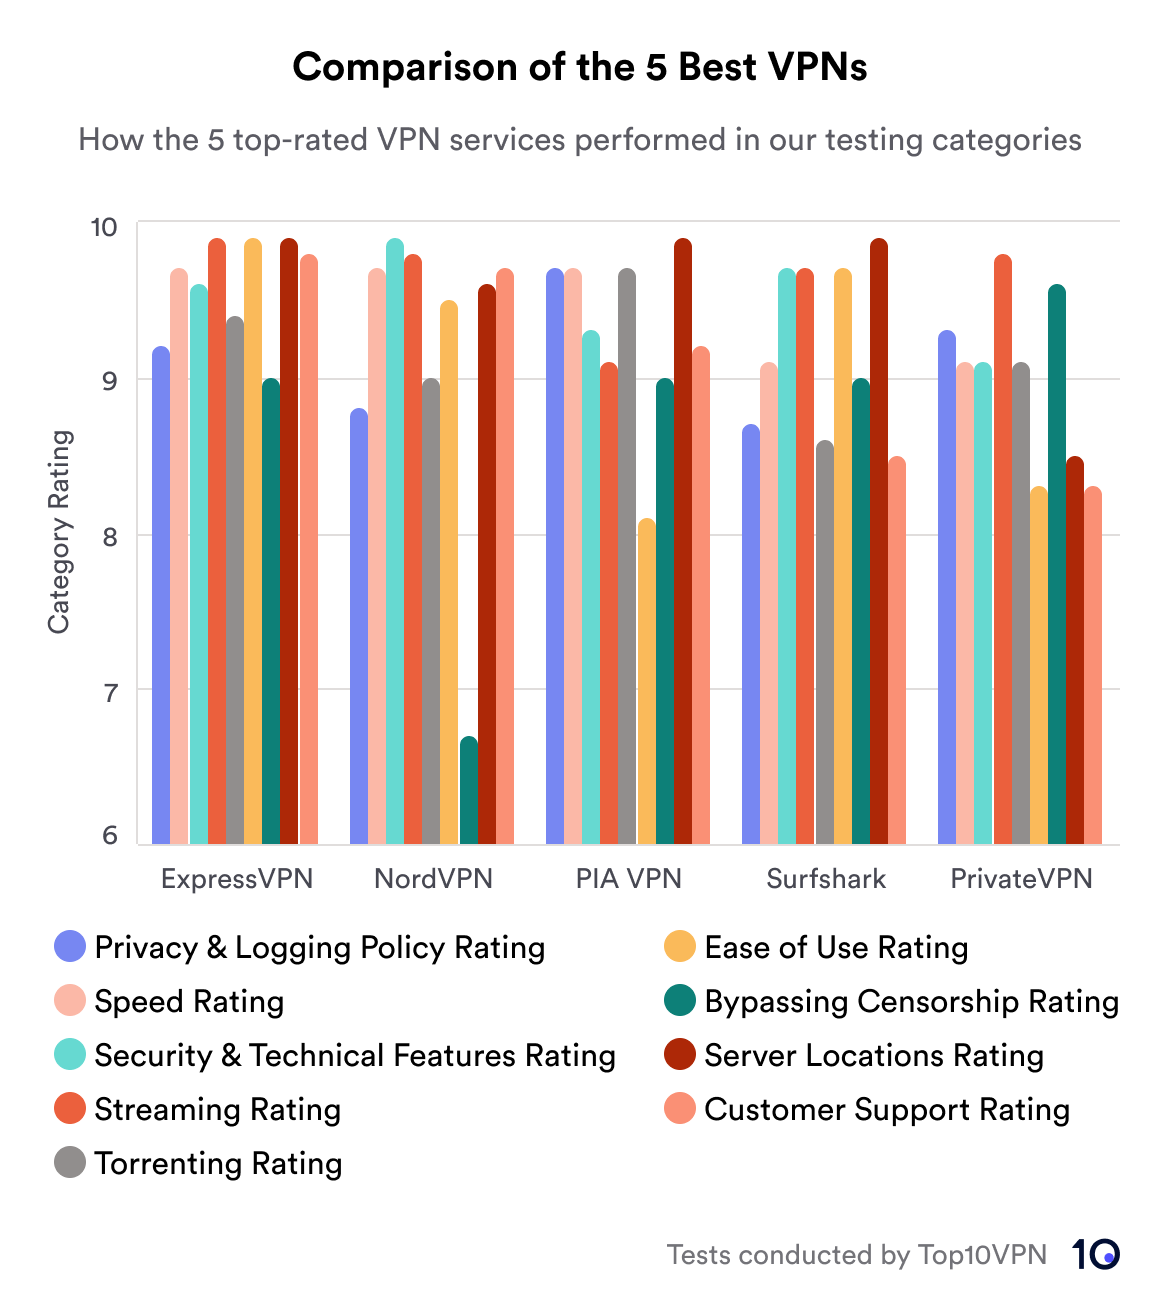 Bar chart showing a comparison of the five best vpns (ExpressVPN, NordVPN, PIA VPN, Surfshark and PrivateVPN and how they score in various testing categories on a scale from 6 to 10. Categories include Privacy & Logging Policy, Speed, Security & Technical Features, Streaming, Torrenting, Ease of Use, Bypassing Censorship, Server Locations, and Customer Support.